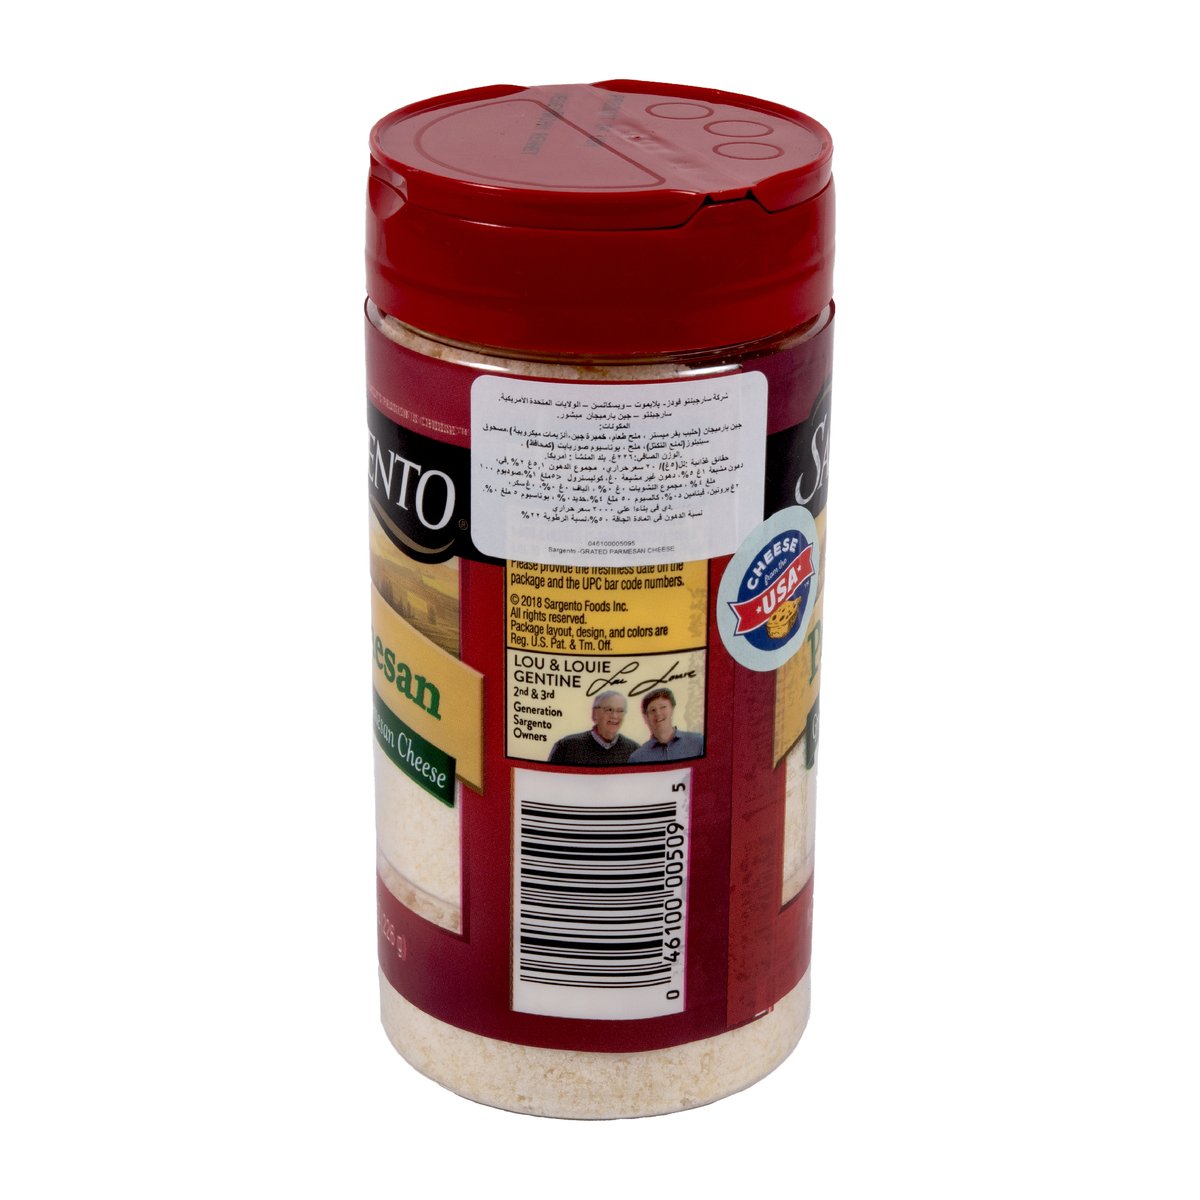 Sargento Grated Parmesan Cheese 226 g